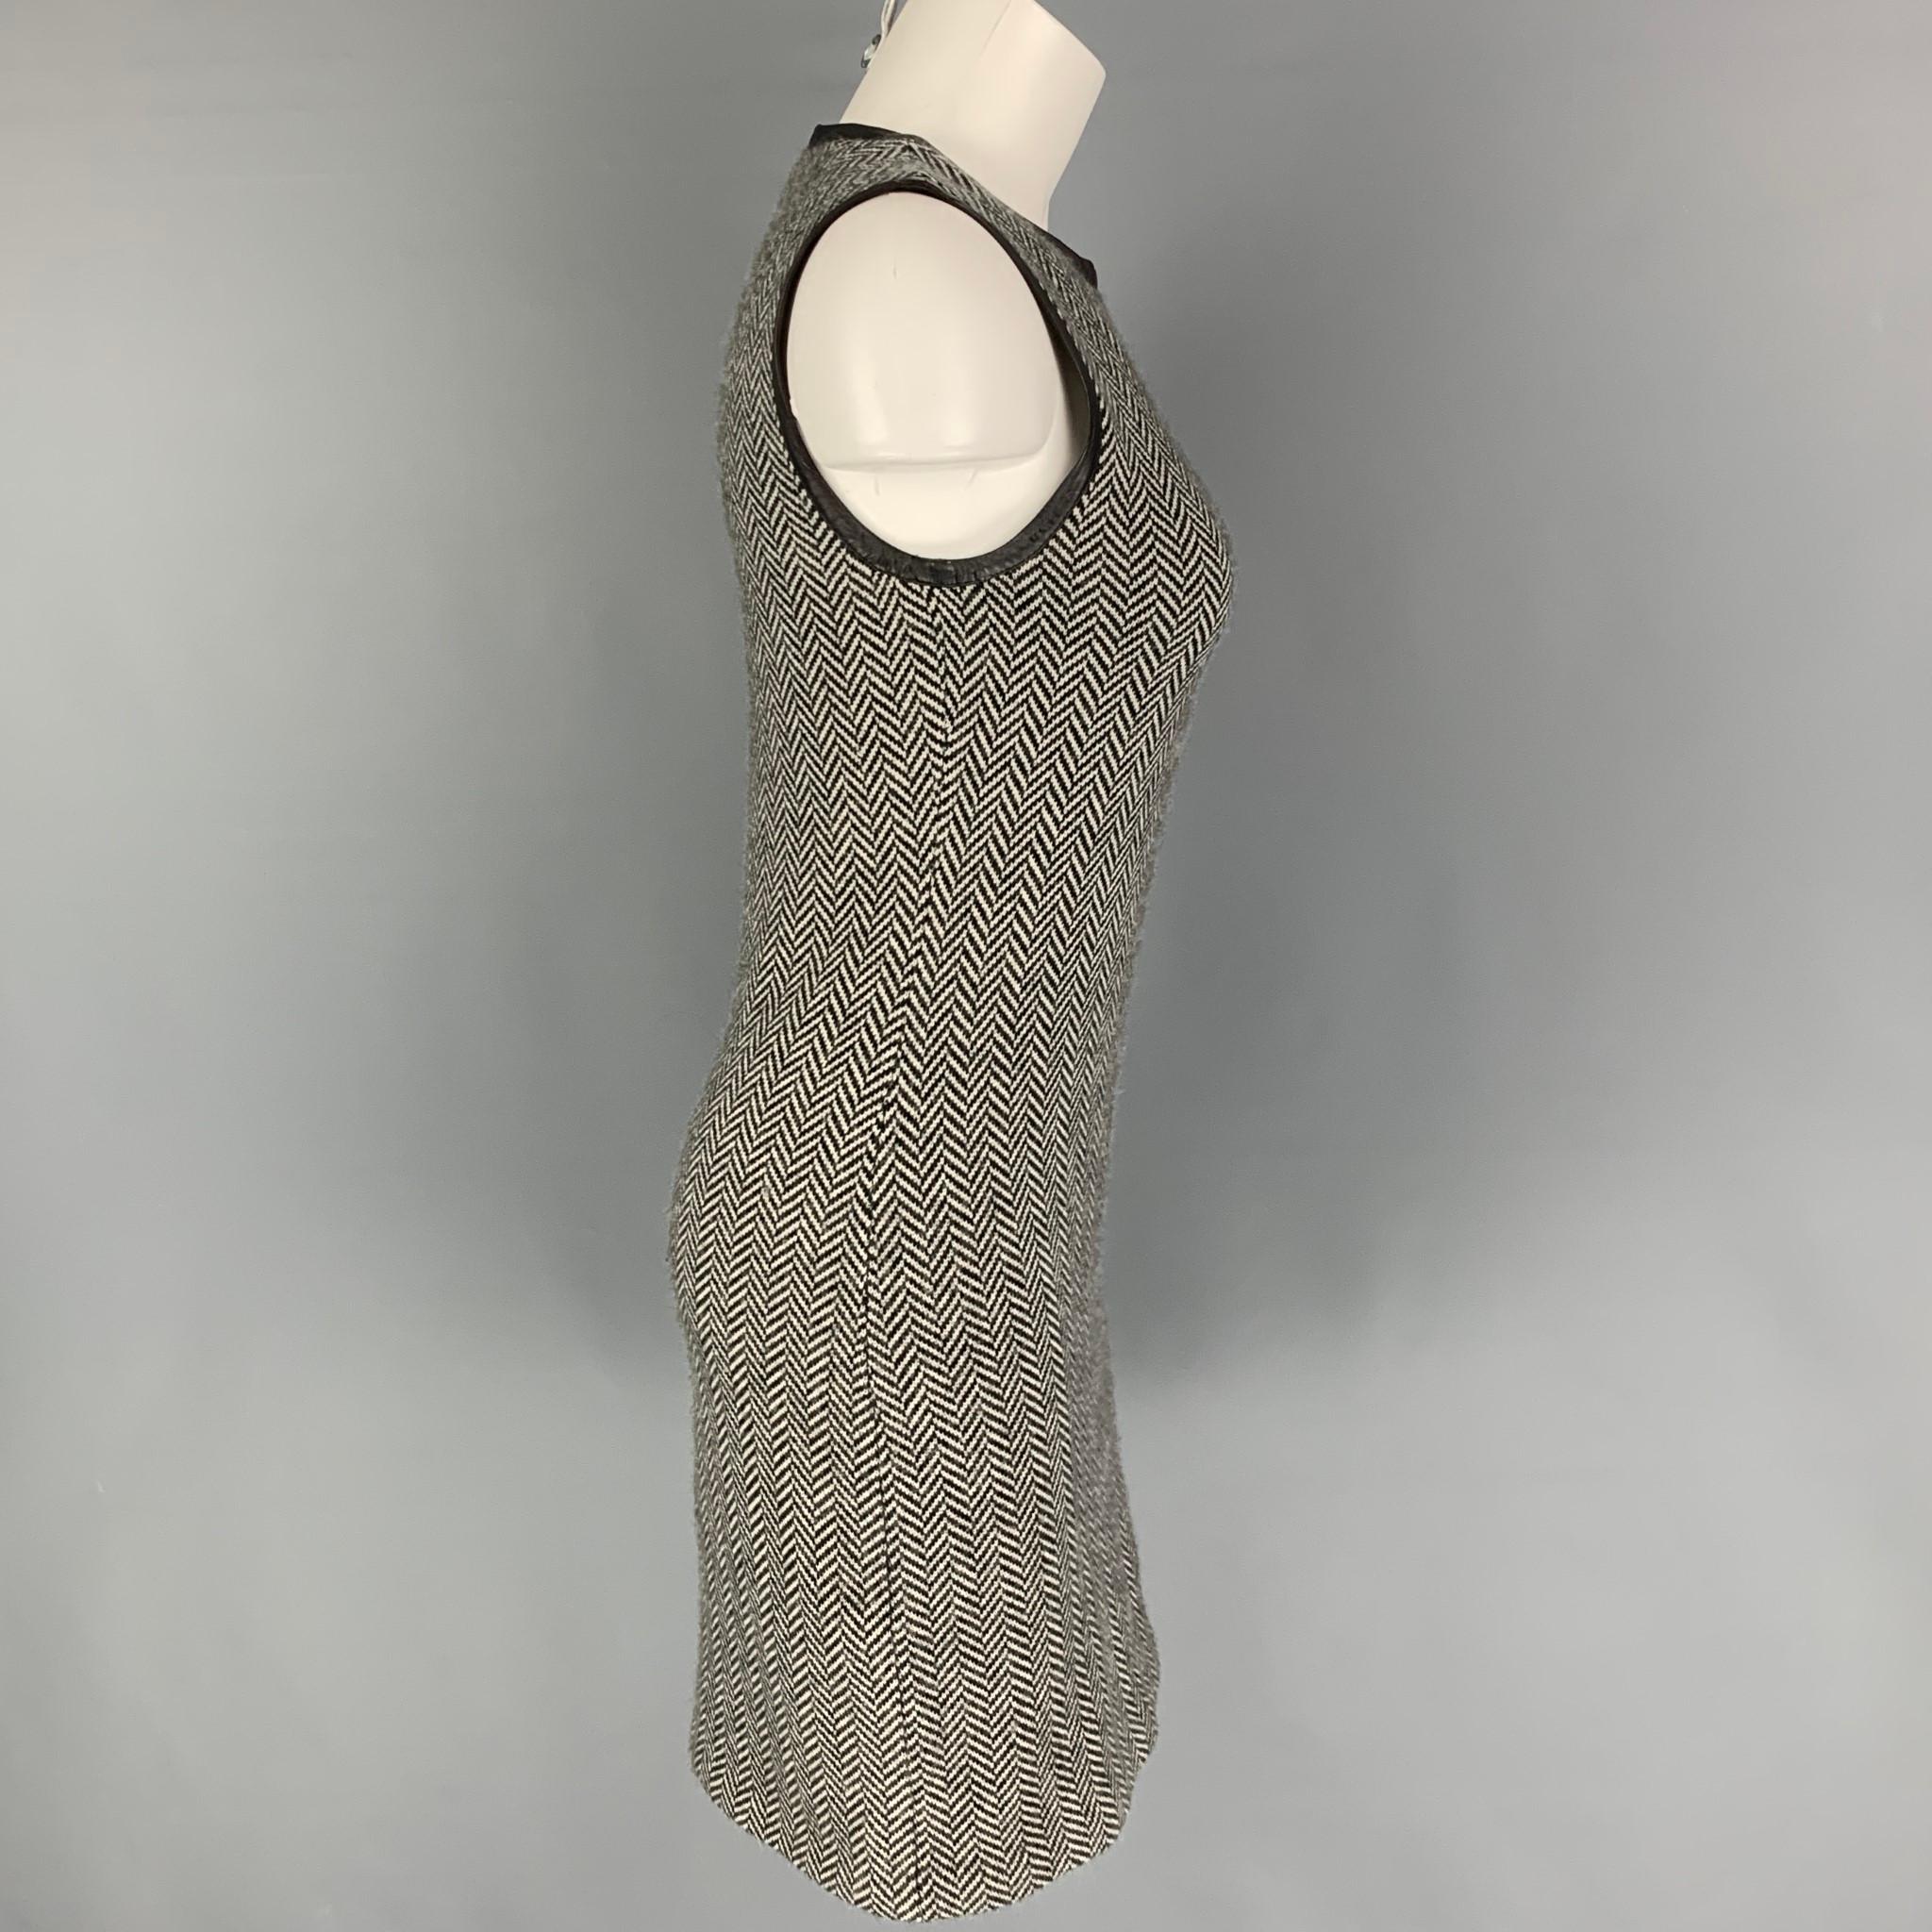 RALPH LAUREN 'Black Label' dress comes in a black & white herringbone cashmere featuring a leather trim, sleeveless, and a back zip up closure. 

Very Good Pre-Owned Condition.
Marked: M

Measurements:

Shoulder: 13.5 in.
Bust: 30 in.
Waist: 28